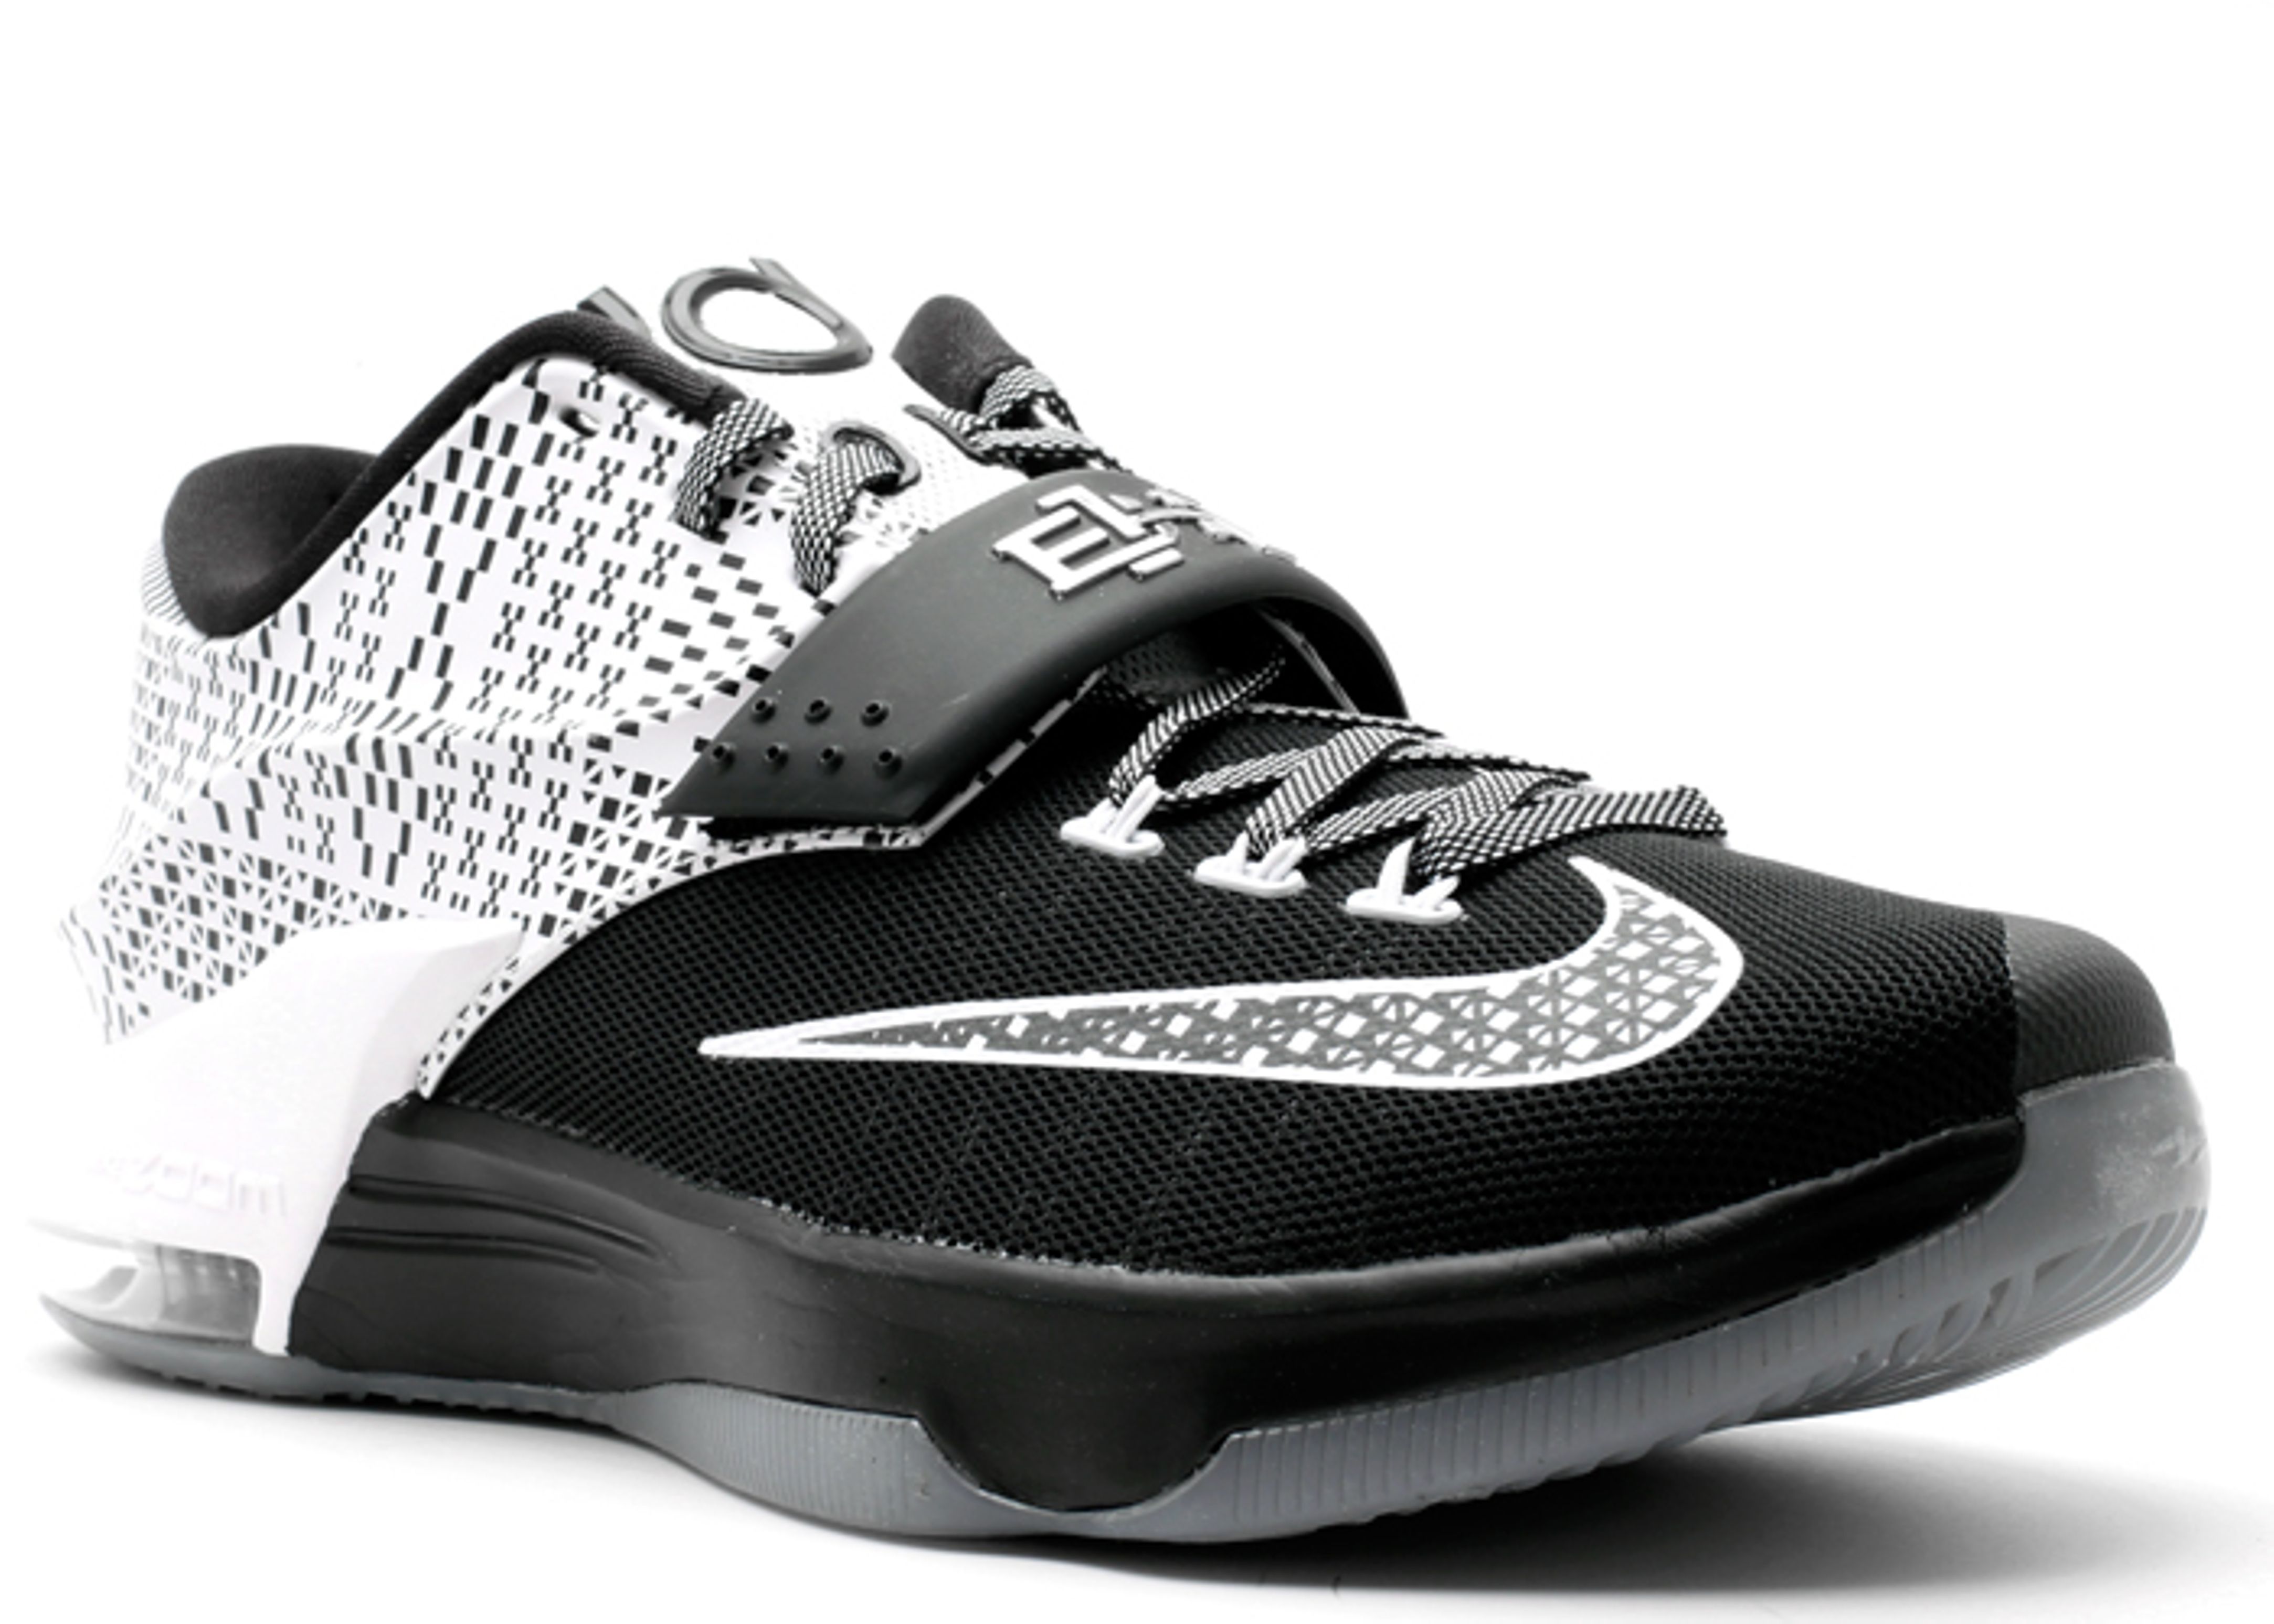 kd 7 black and white